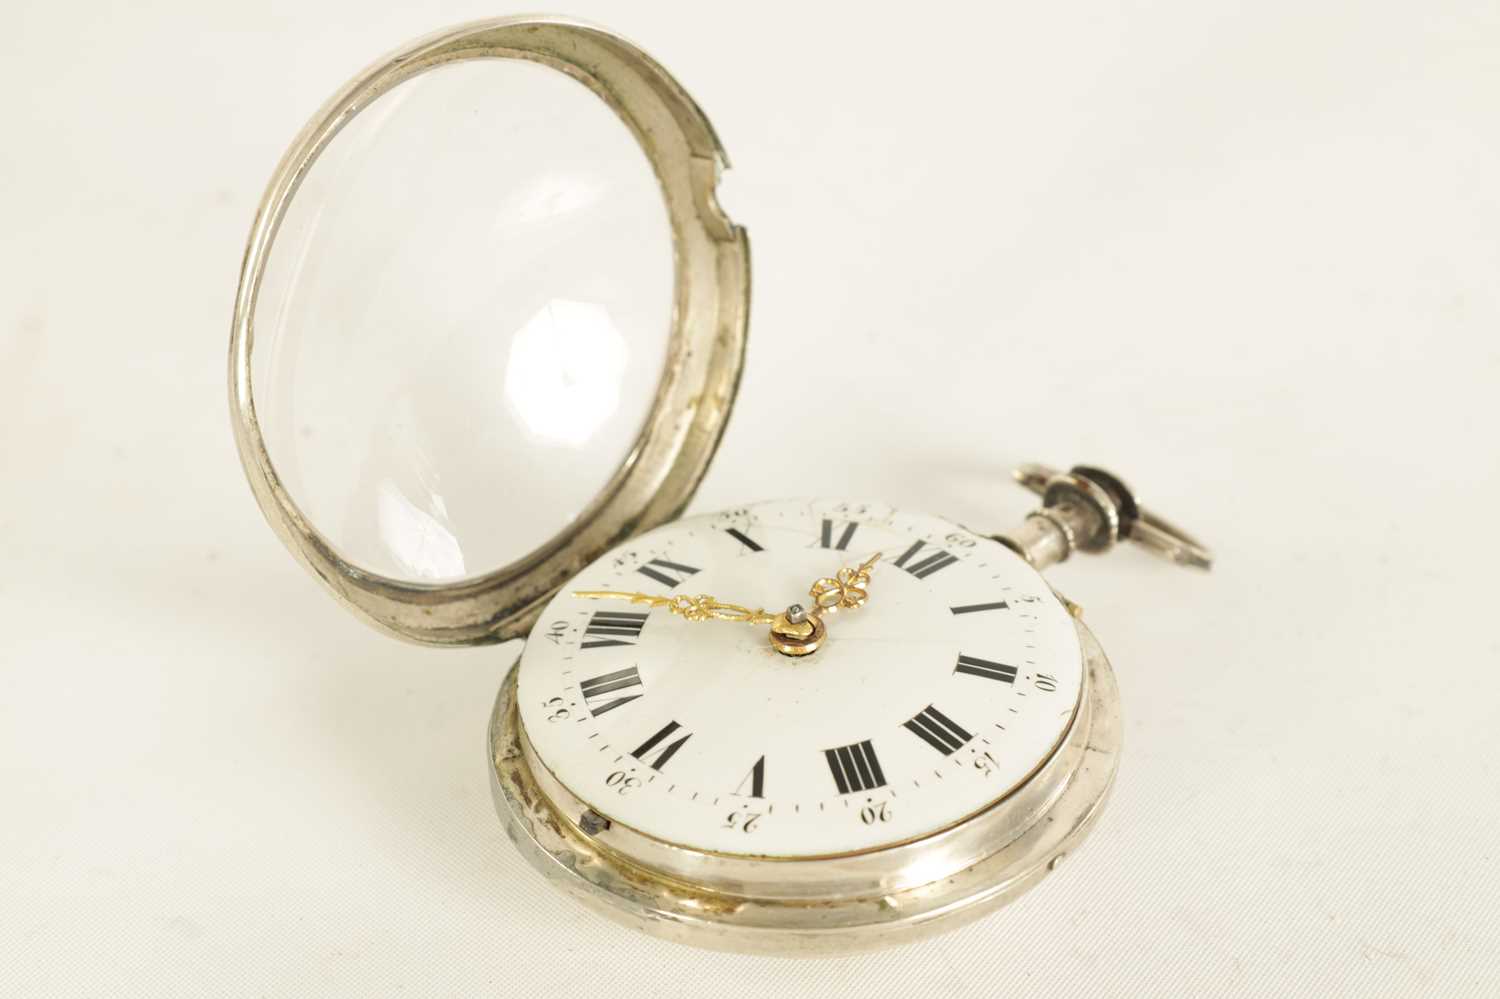 A LATE 18TH CENTURY CONTINENTAL PAIR CASE VERGE POCKET WATCH - Image 3 of 9